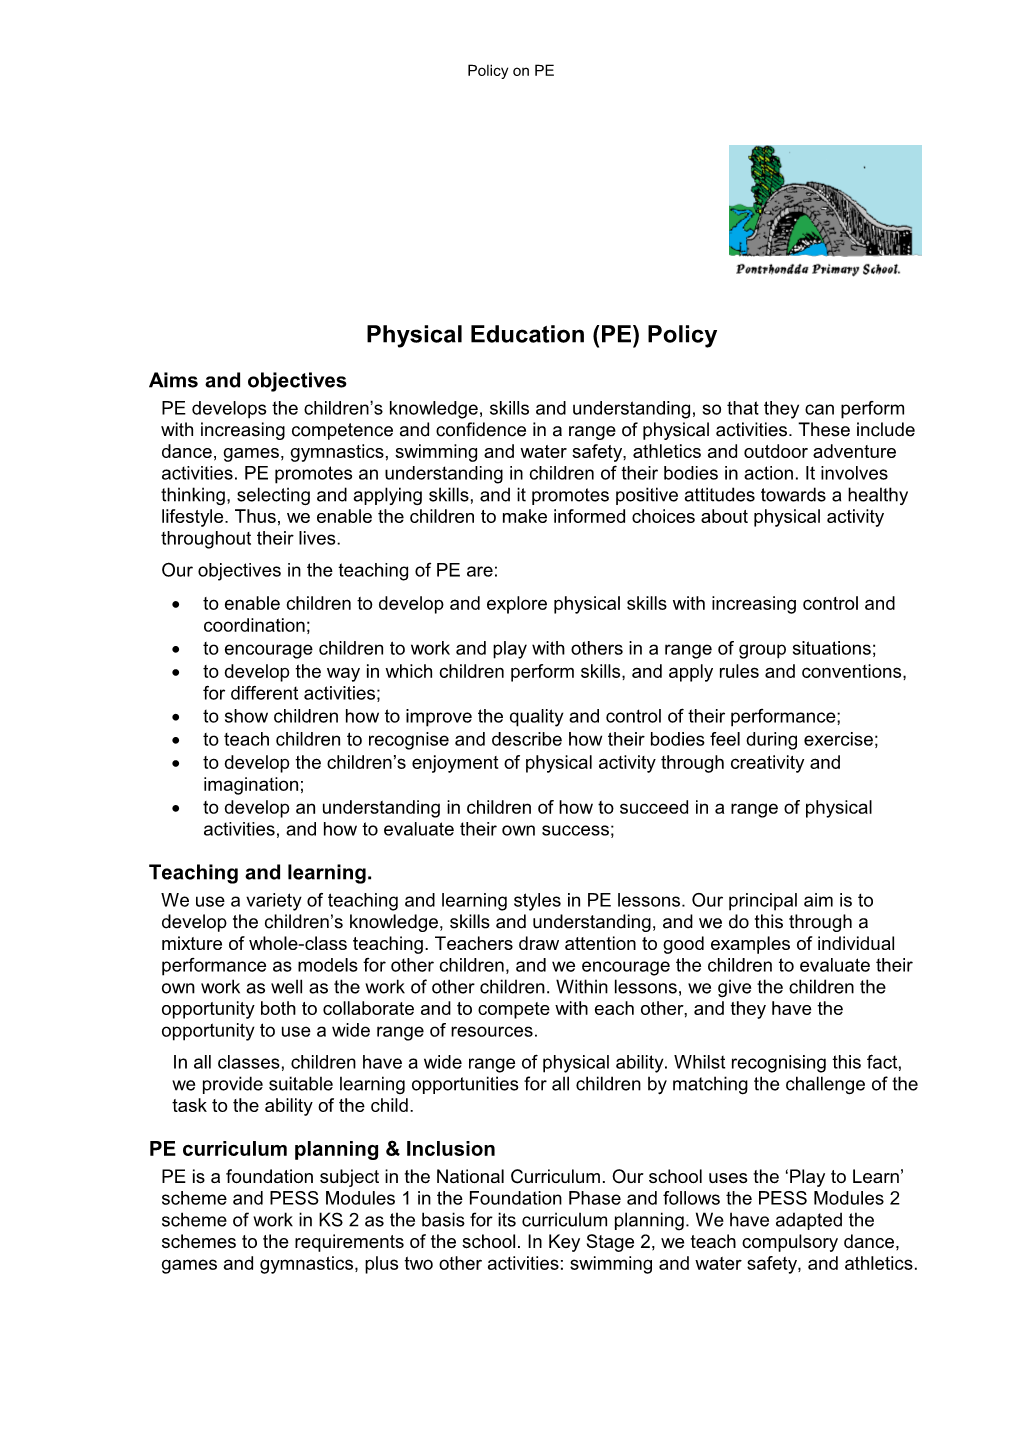 Policy on Physical Education (PE)